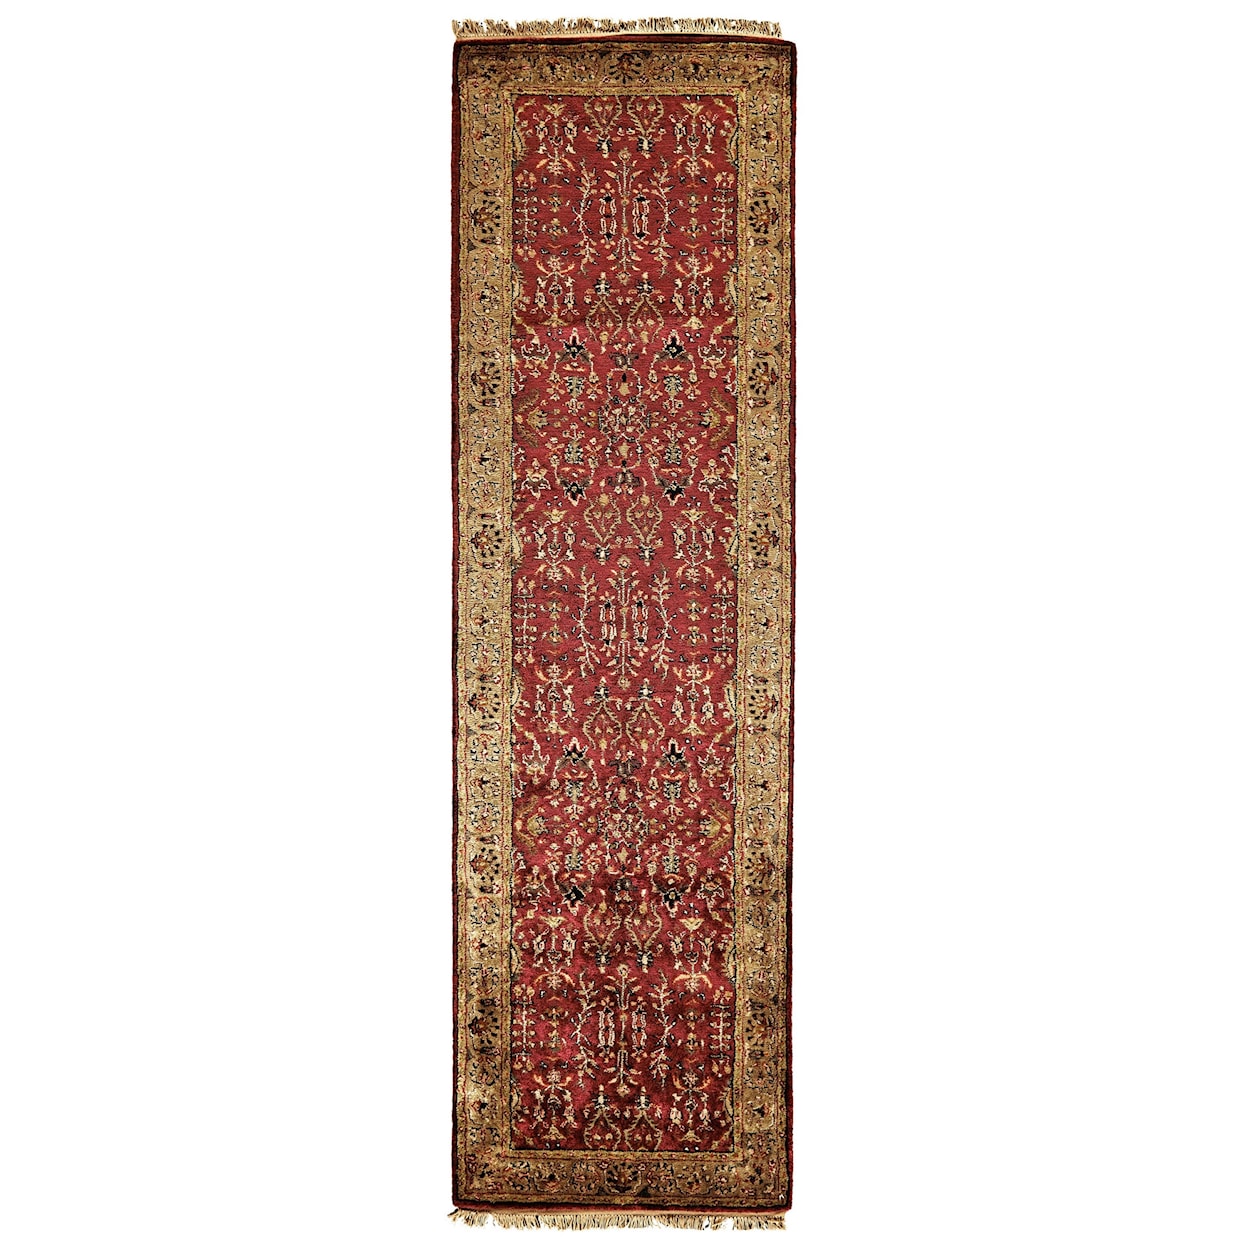 Feizy Rugs Amore Red/Light Gold 9'-6" x 13'-6" Area Rug